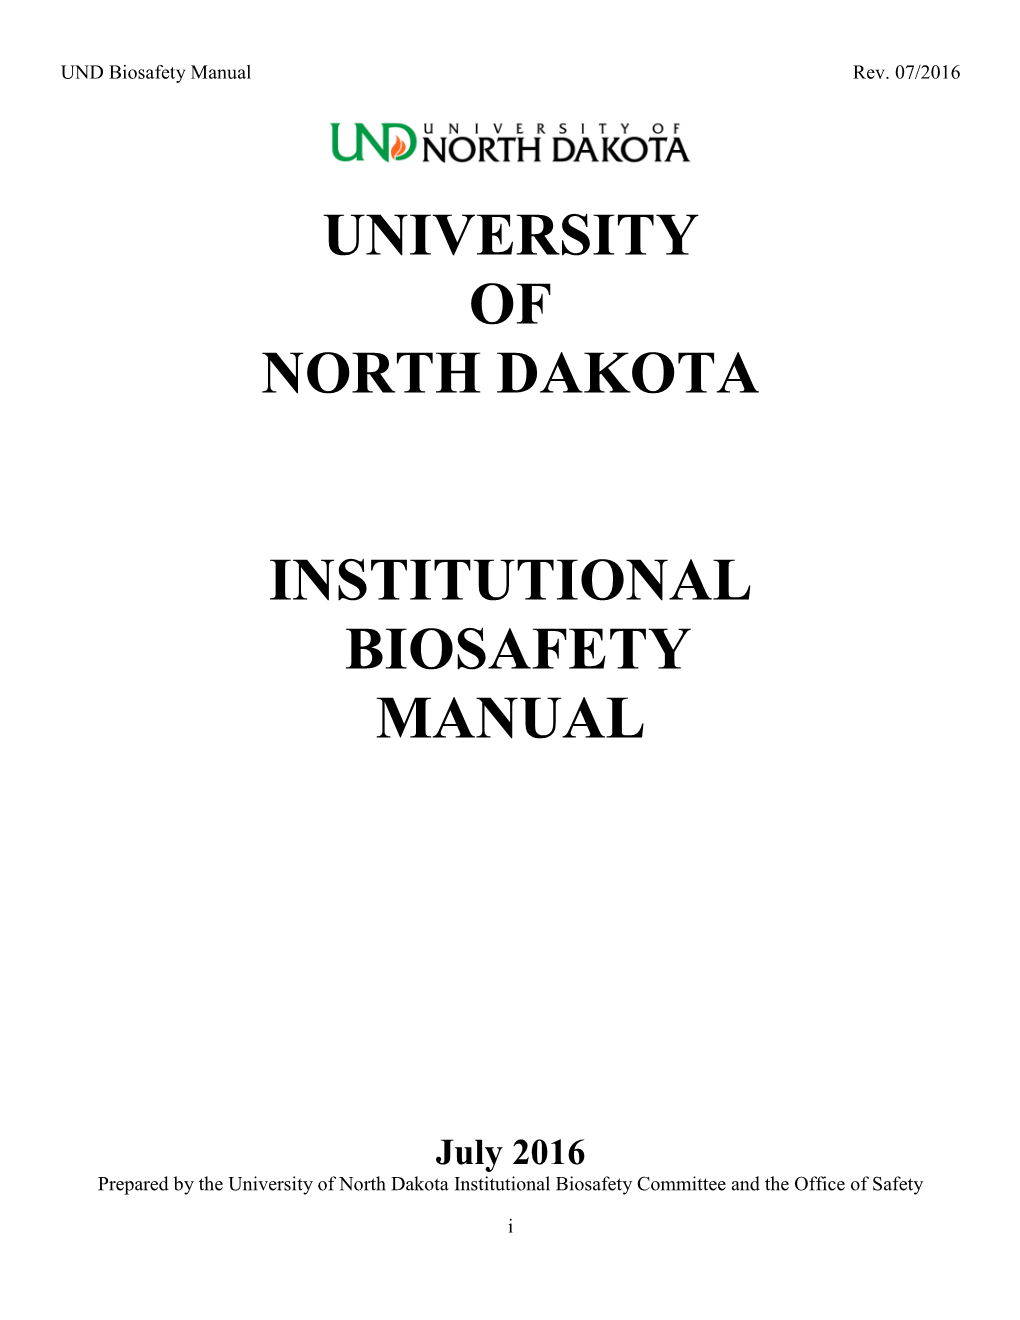 Institutional Biosafety Manual